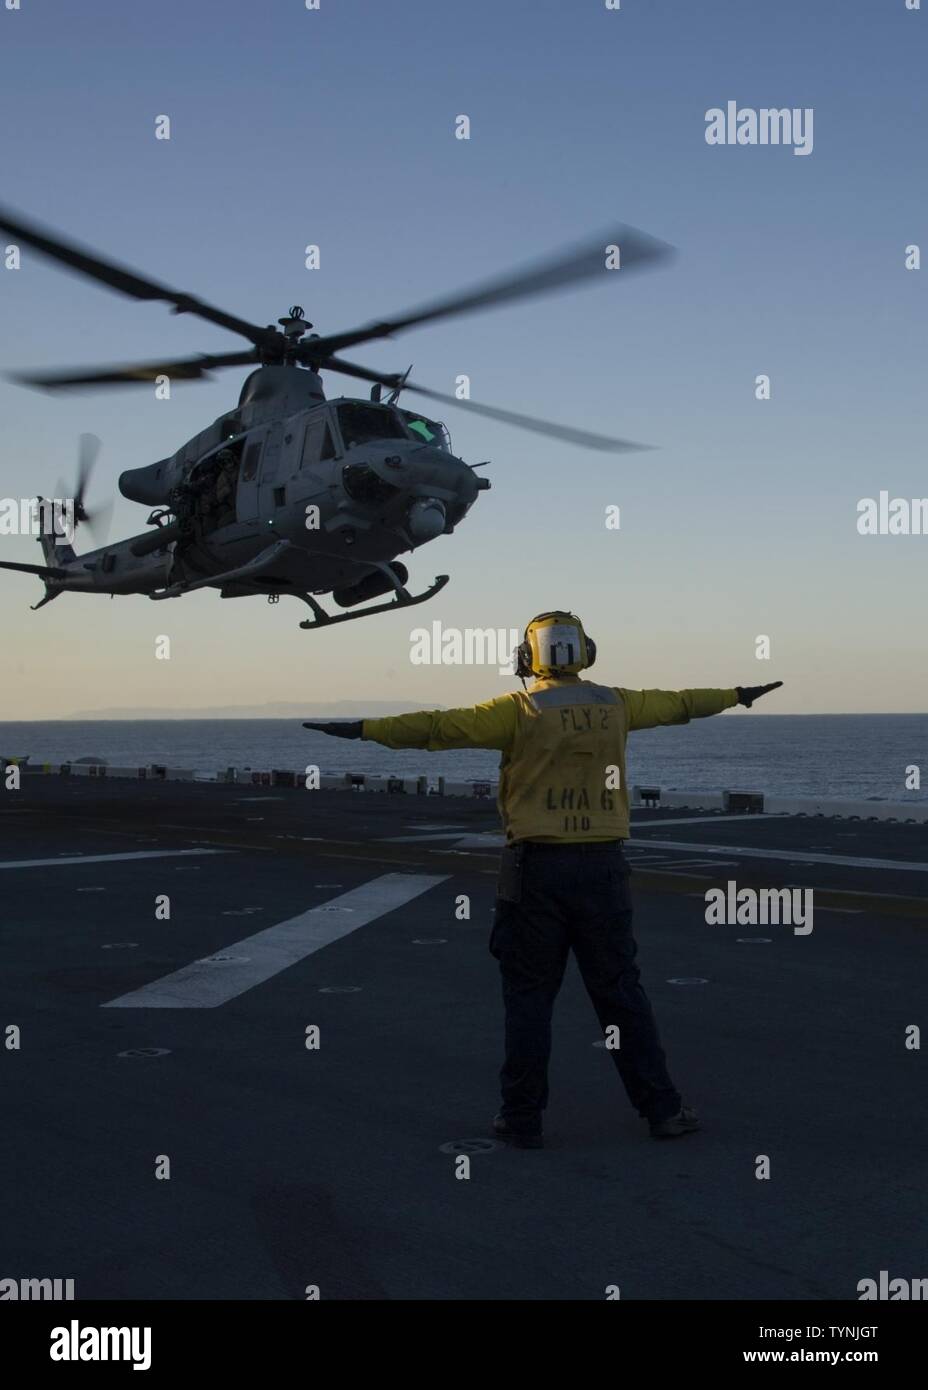 PACIFIC OCEAN (Nov. 17, 2016) A UH-1 Iroquois Helicopter assigned to Marine Operational Test and Evaluation Squadron 1 (VMX-1) lands on the flight deck of amphibious assault ship USS America (LHA 6) as part of the air wing including F-35B Lightning II aircrafts. The F-35B short takeoff/vertical landing (STOVL) variant is the world’s first supersonic STOVL stealth aircraft. America, with VMX-1, Marine Fighter Attack Squadron 211 (VMFA-211) and Air Test and Evaluation Squadron 23 (VX-23) embarked, are underway conducting operational testing and the third phase of developmental testing for the F- Stock Photo